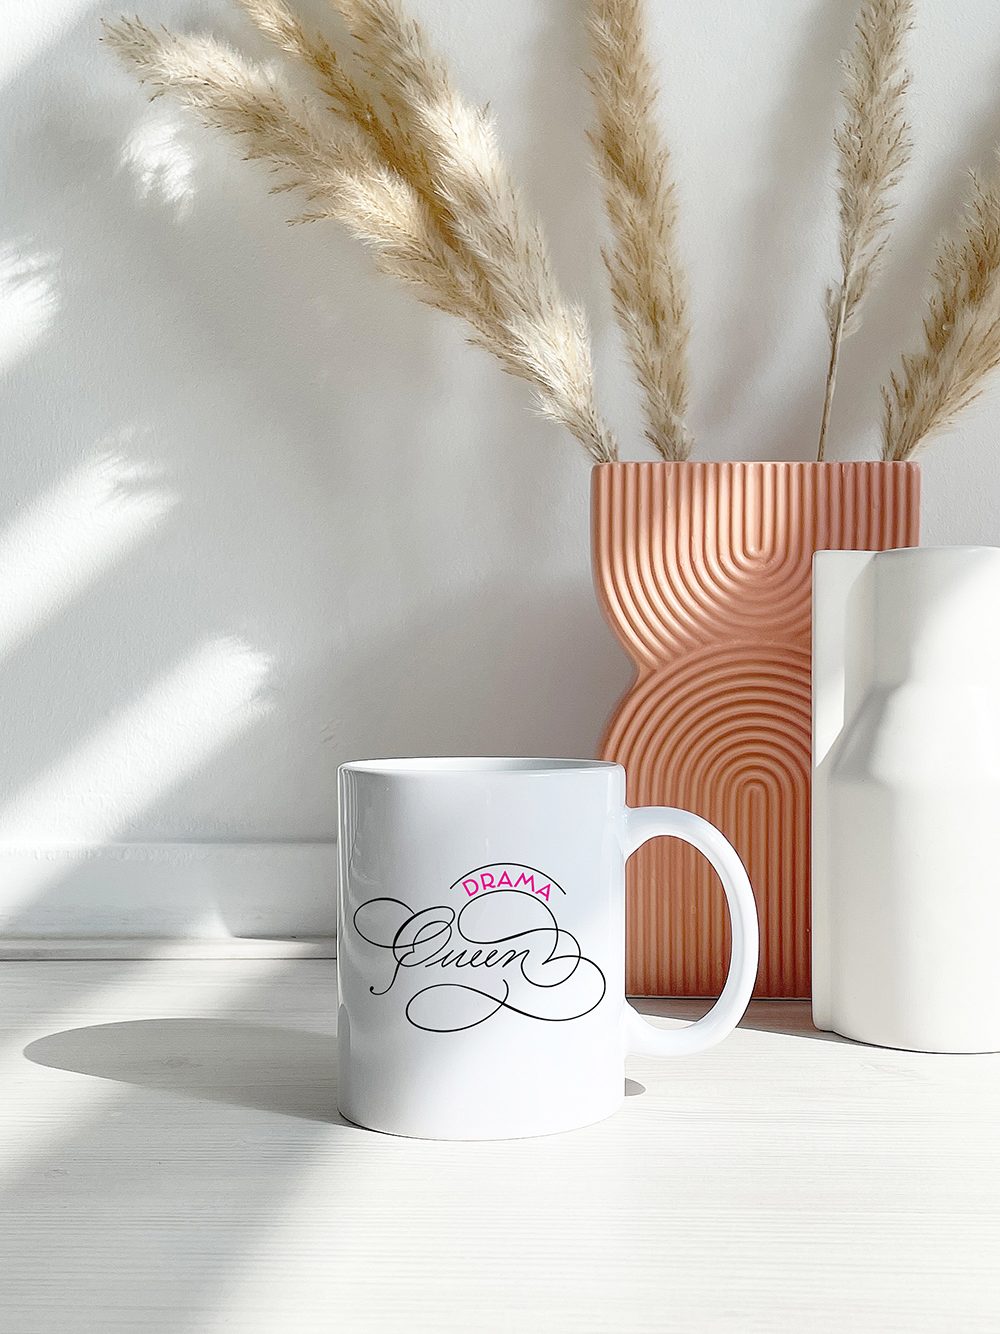 Drama Queen Lettering for decor, accessories or cards.  Design is available as a vector image.  Available art for art licensing

coffee cup with drama queen calligraphy

spot calligraphy